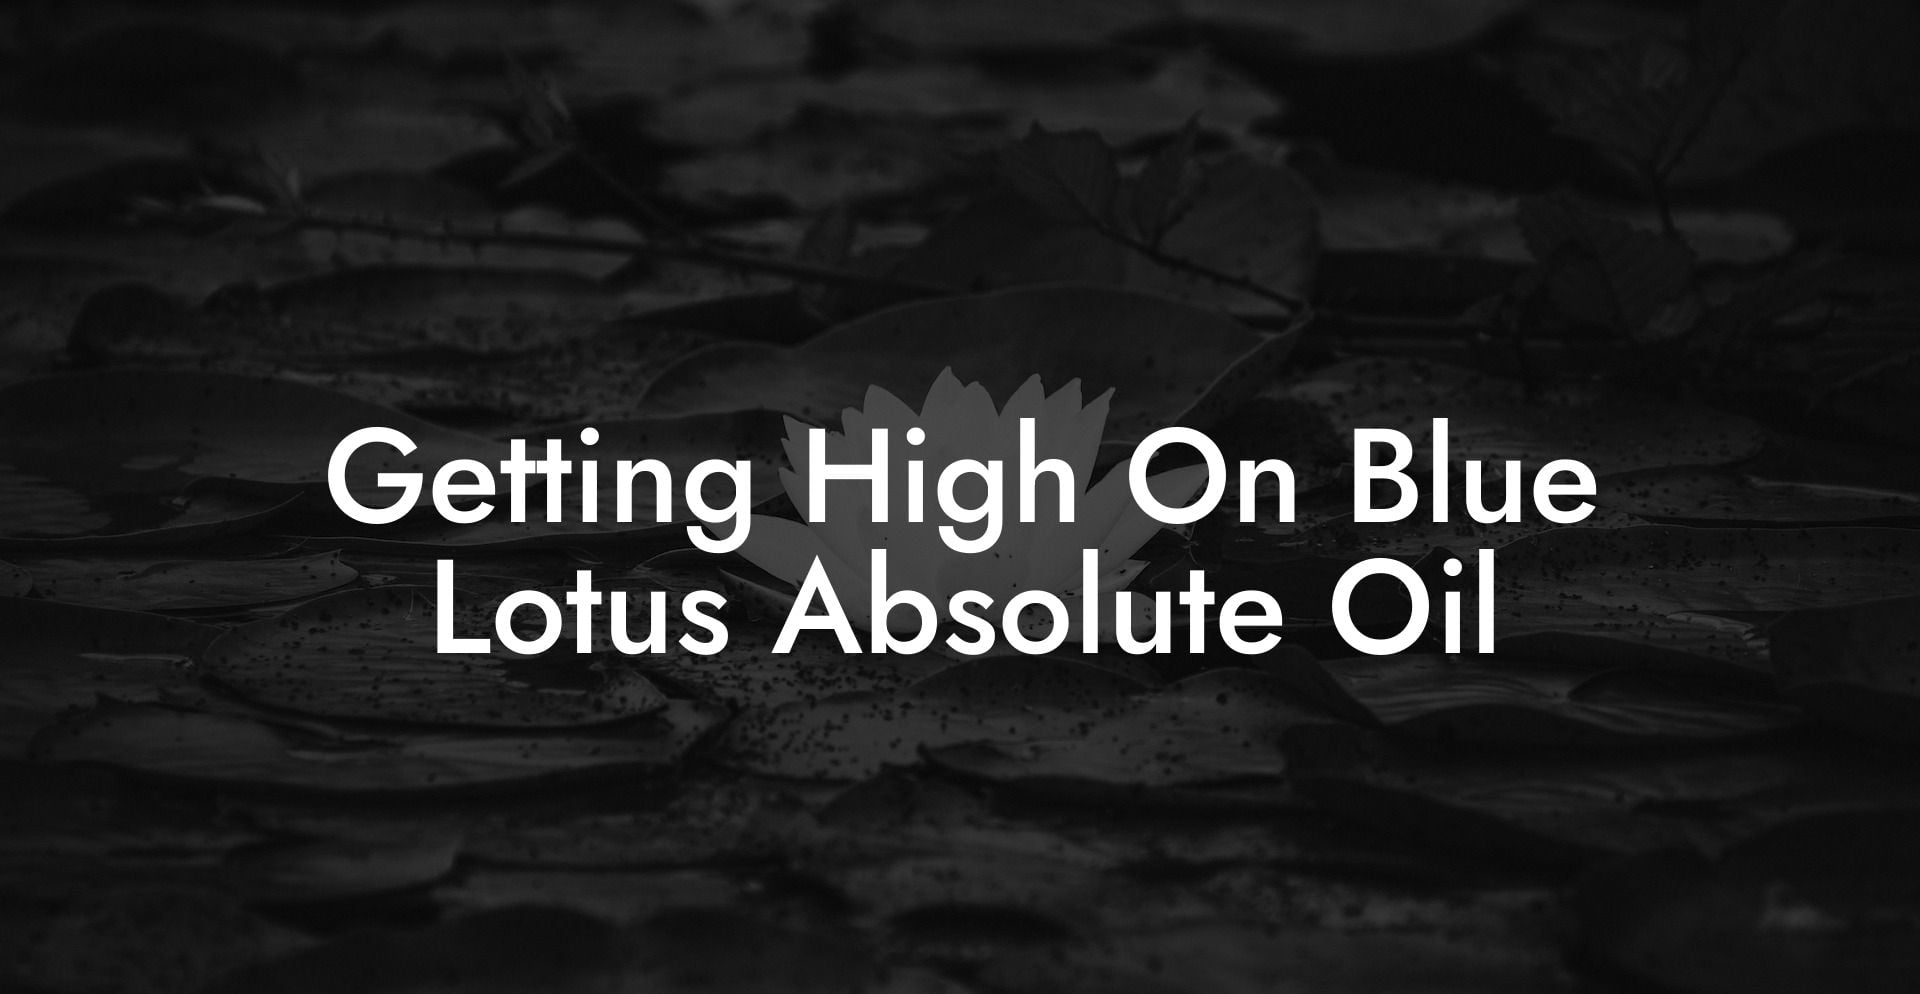 Getting High On Blue Lotus Absolute Oil